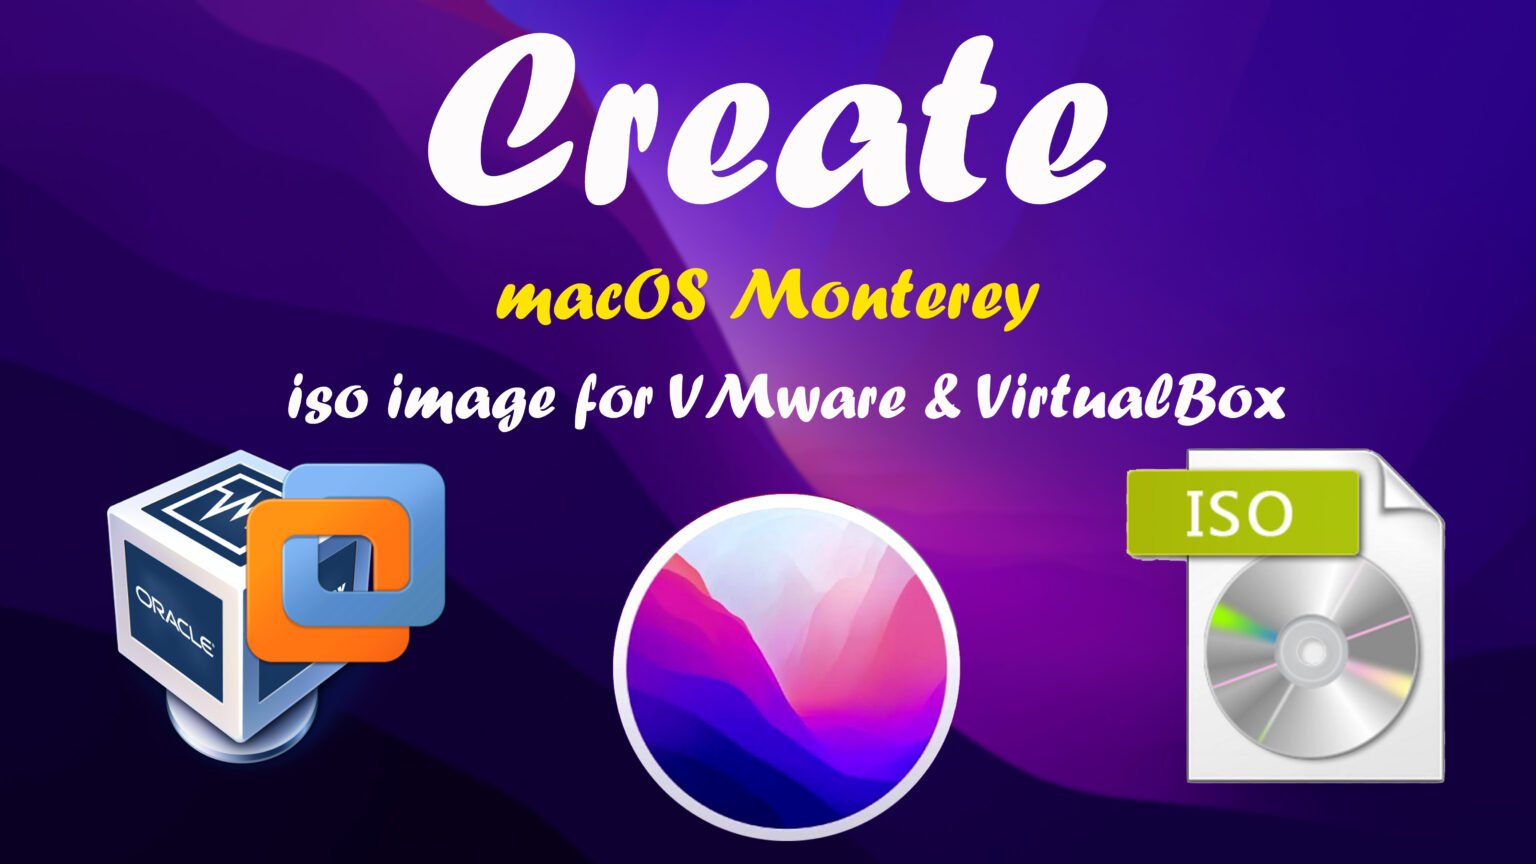 macos monterey iso file download for virtualbox